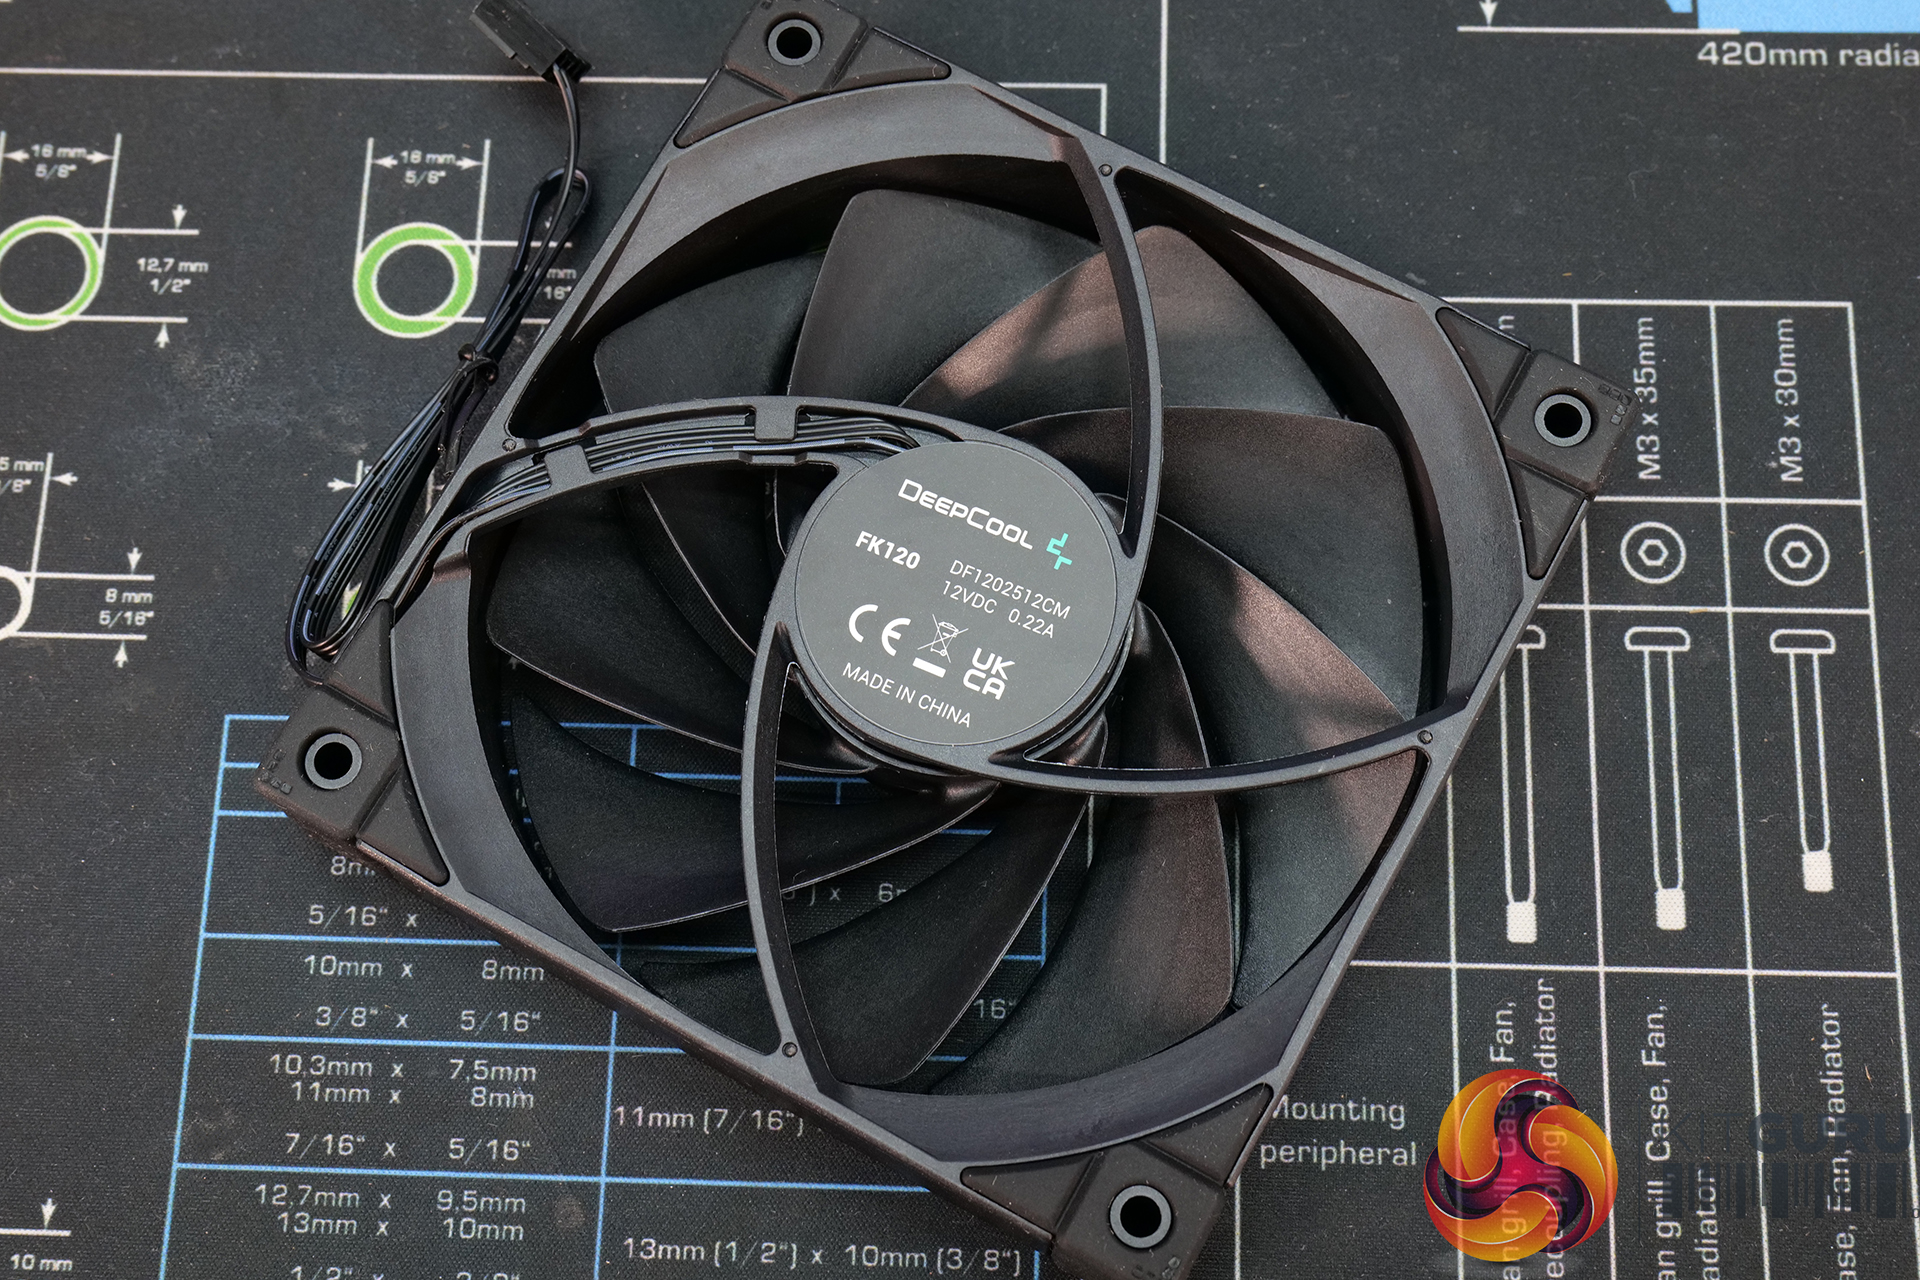 DeepCool LT720 AIO Review: The Best Yet at Cooling the 13900K